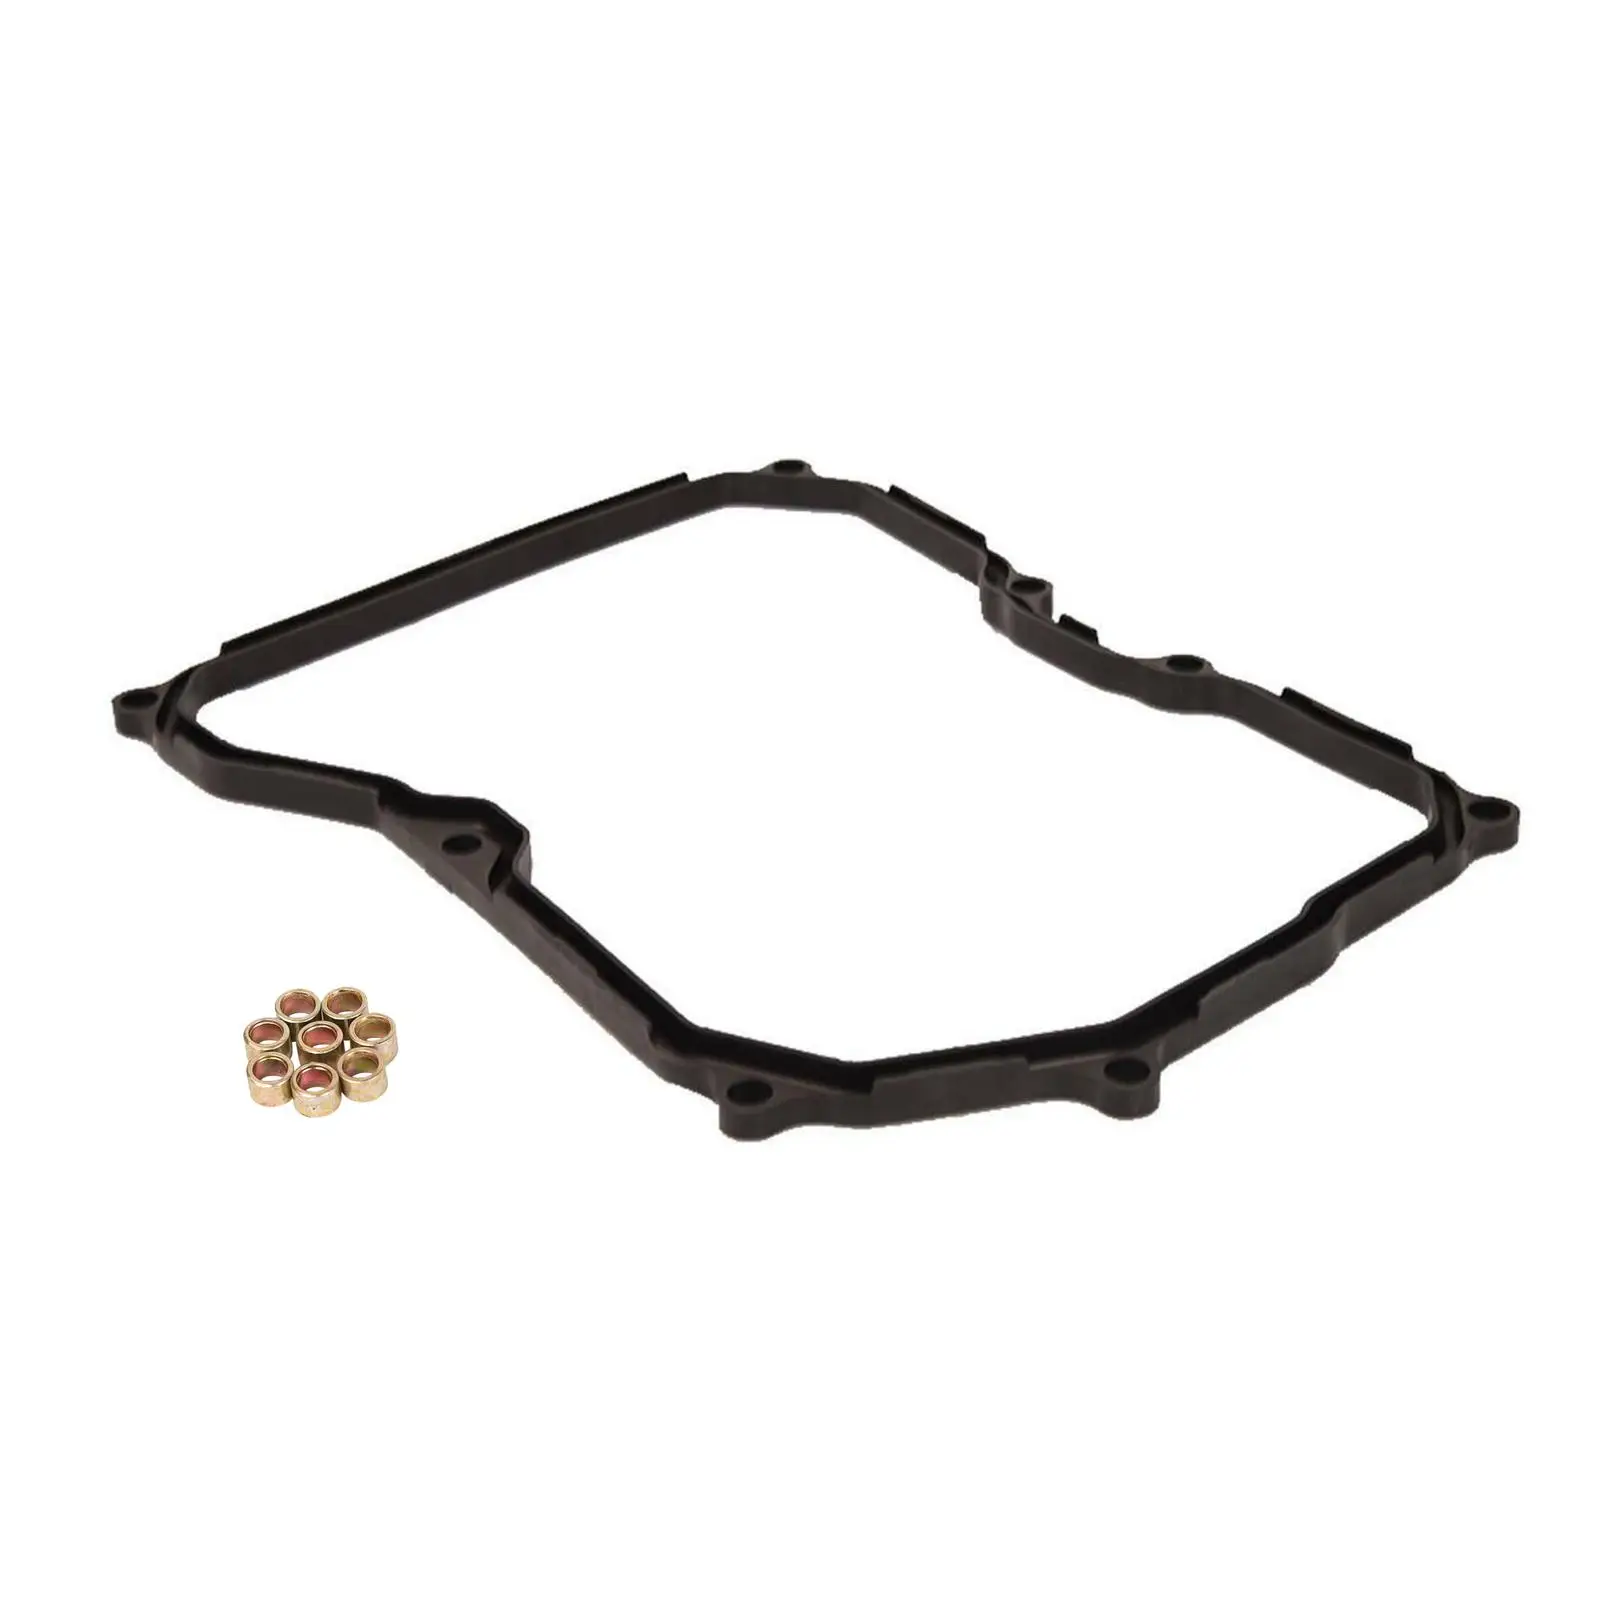 Transmission Pan Gasket Lightweight Fits for Mini 2007+ Accessories Replace